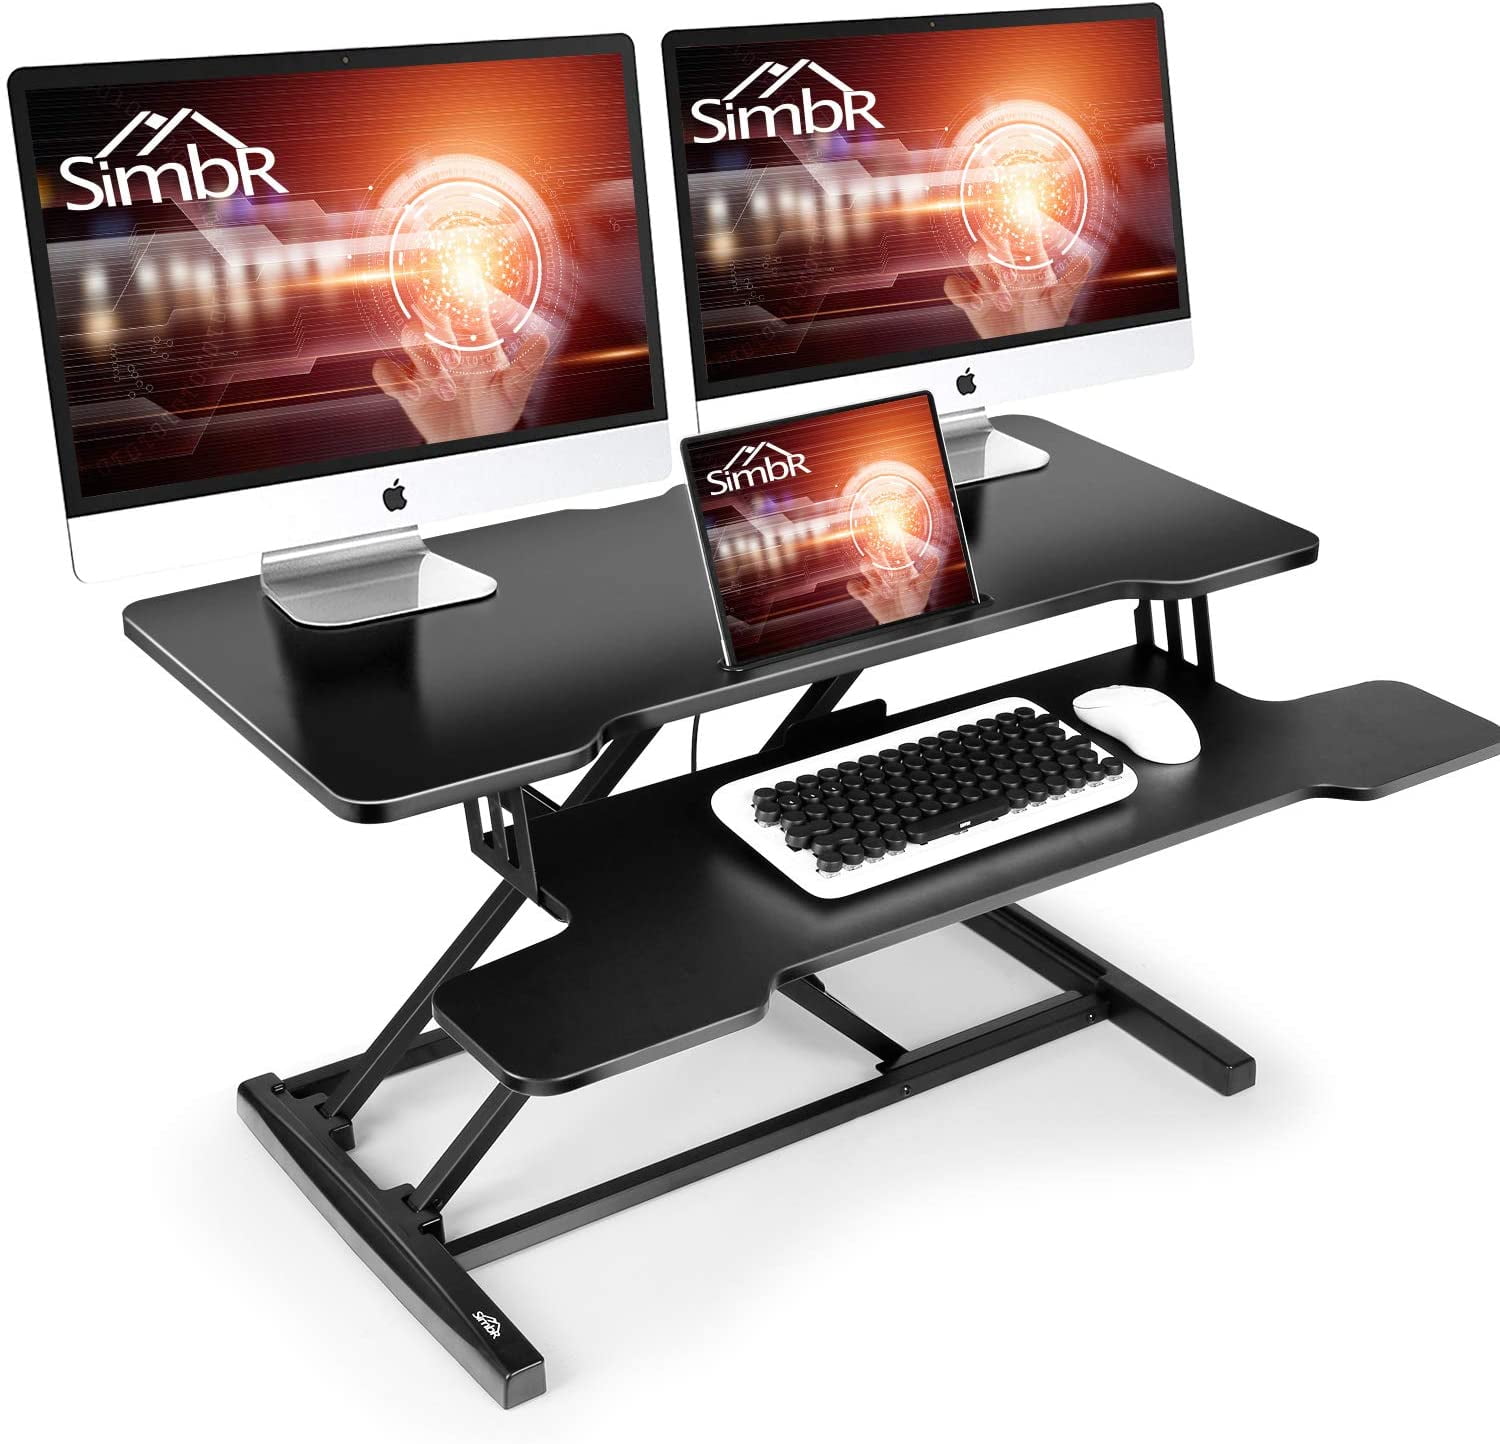 Simbr Standing Desk Converter 36 Inch, 36 Inch Computer Desk With Keyboard Tray